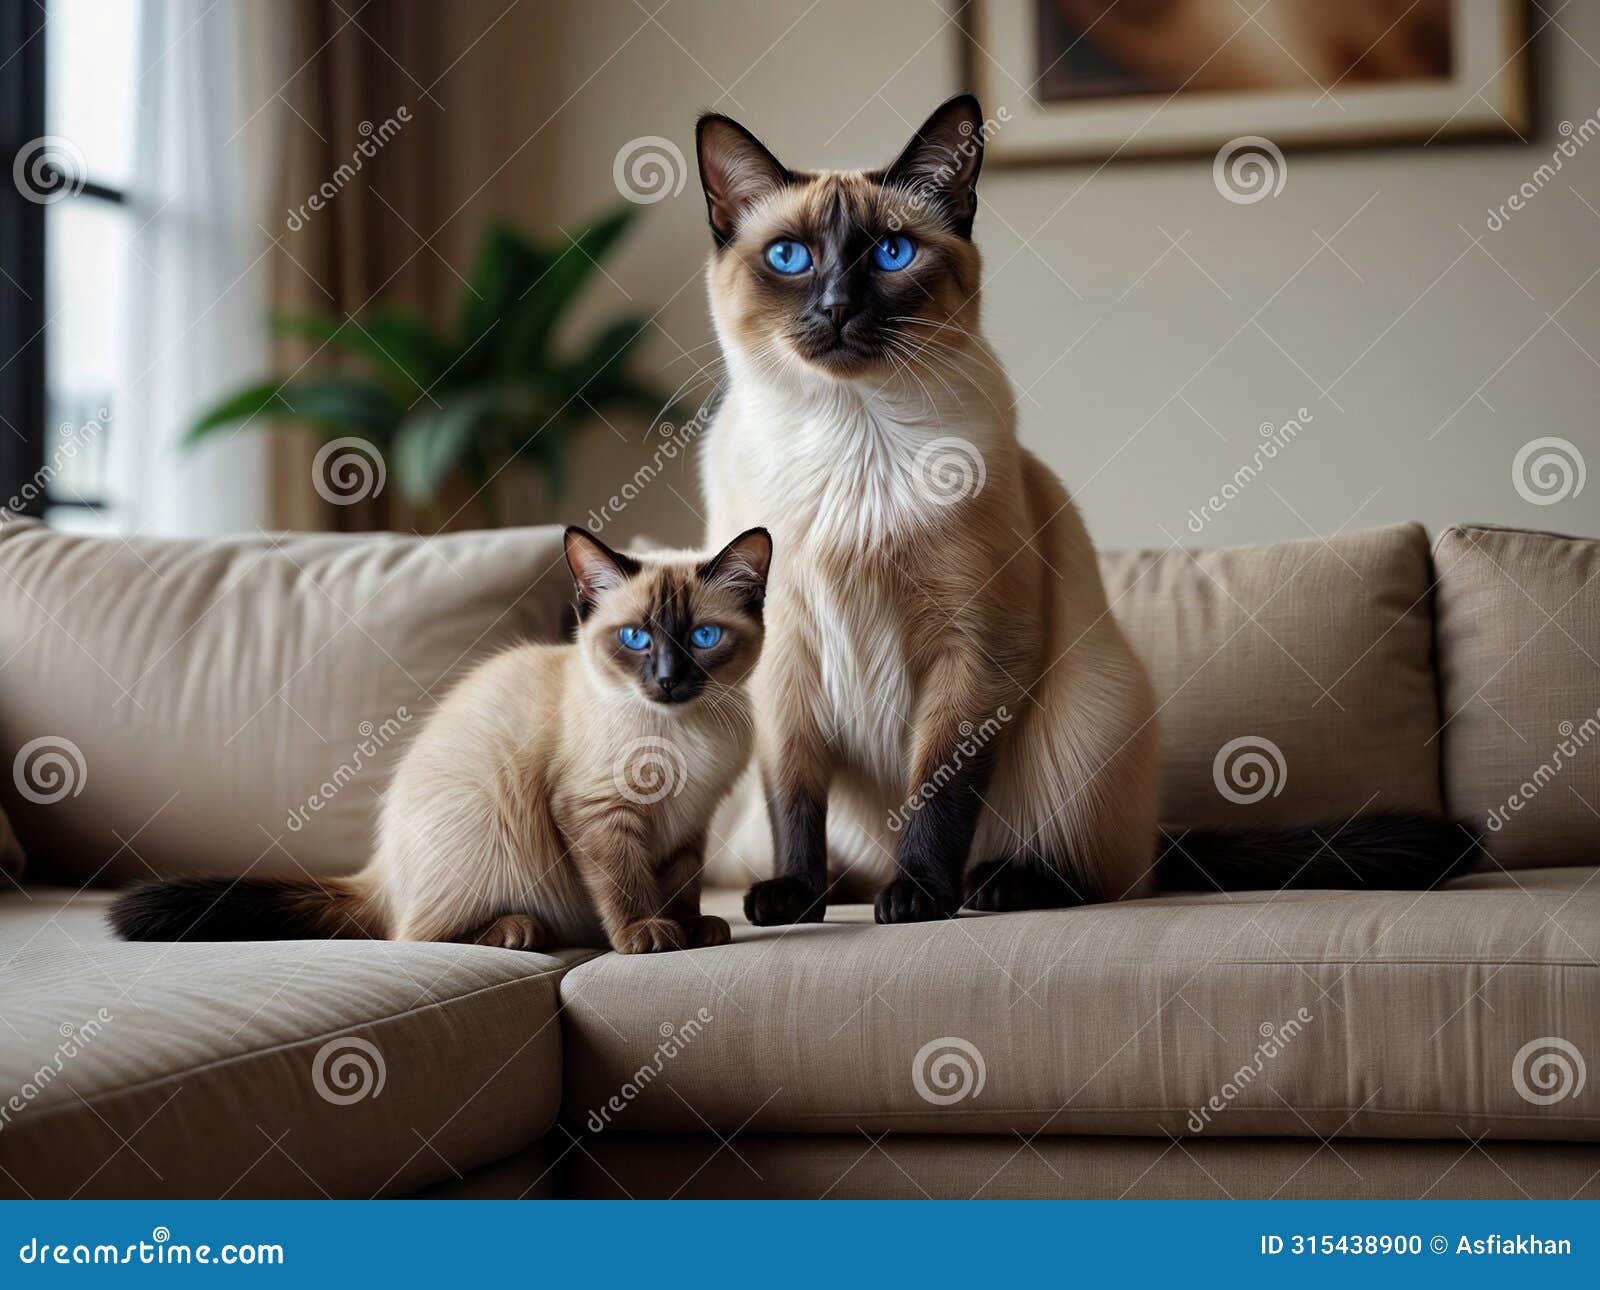 a siamese purebred cat and kitten kitty sit side by side